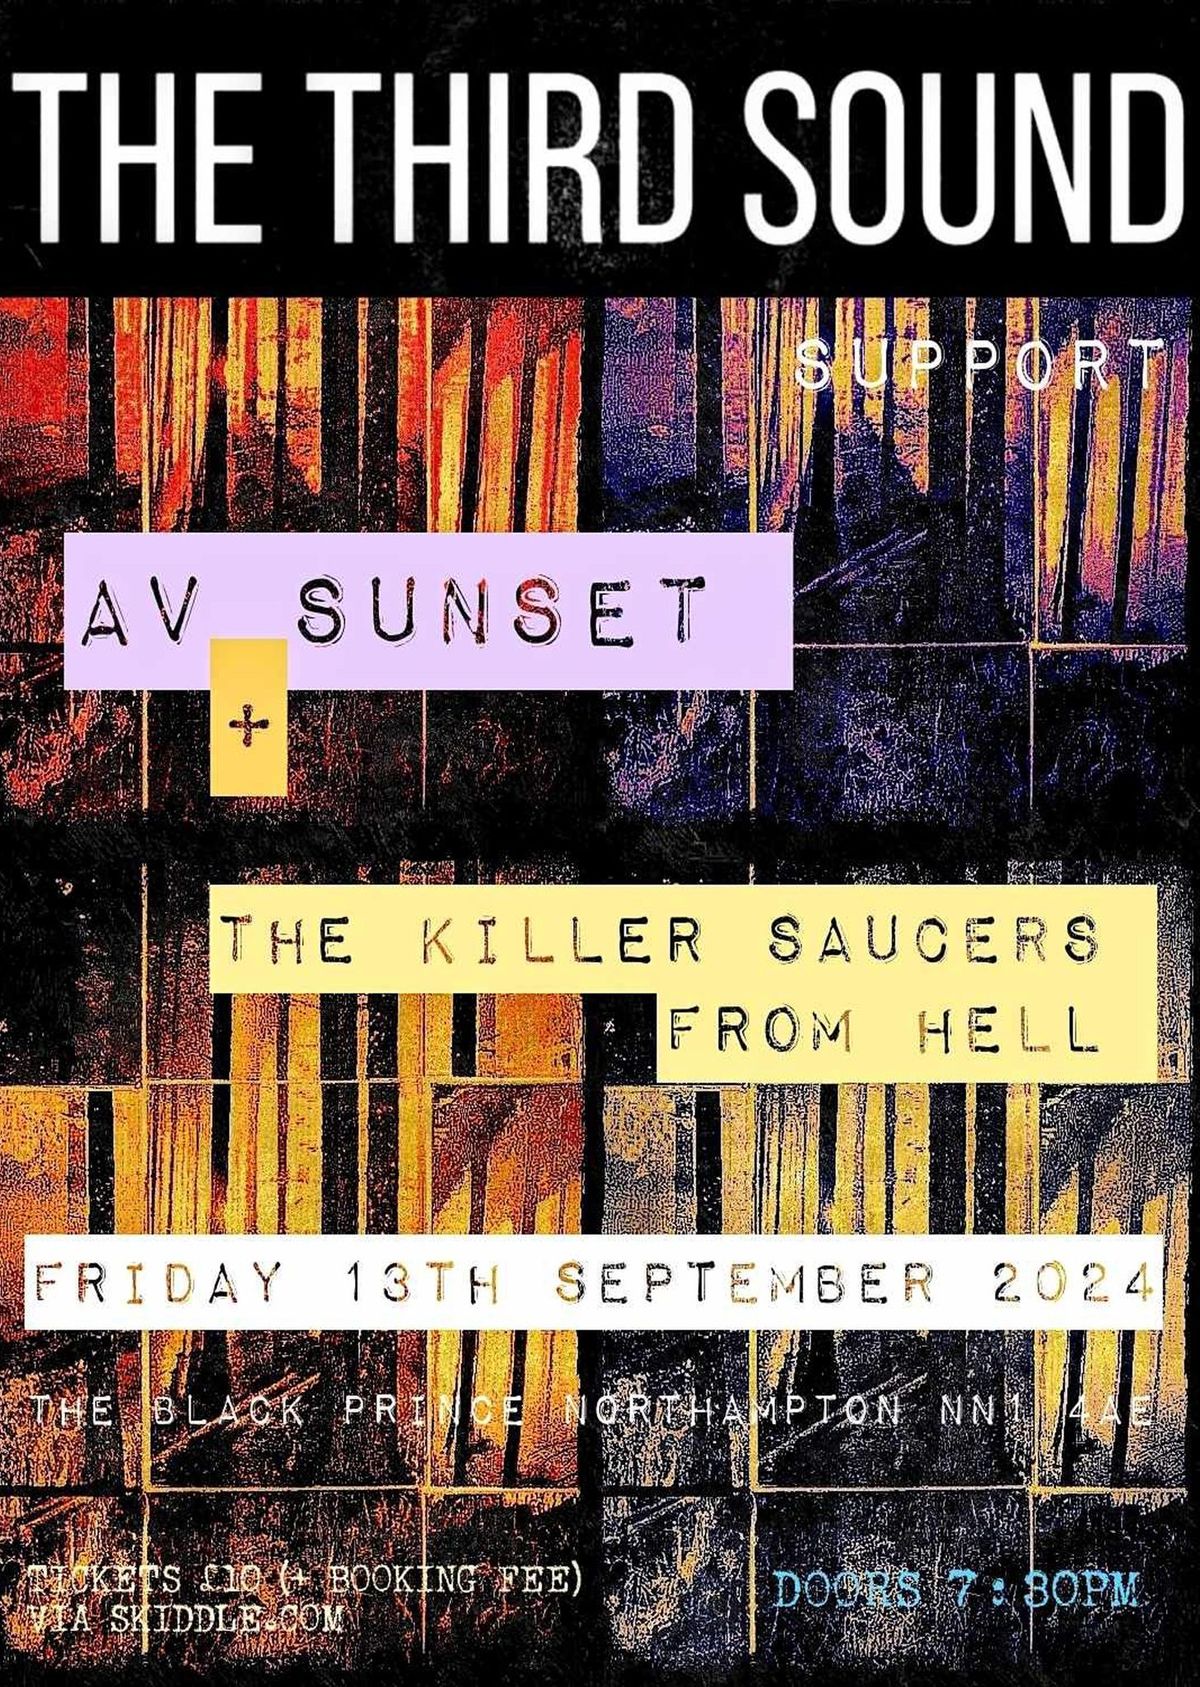 The Third Sound + Killer Saucers From Hell + AV Sunset | The Black Prince, Northampton